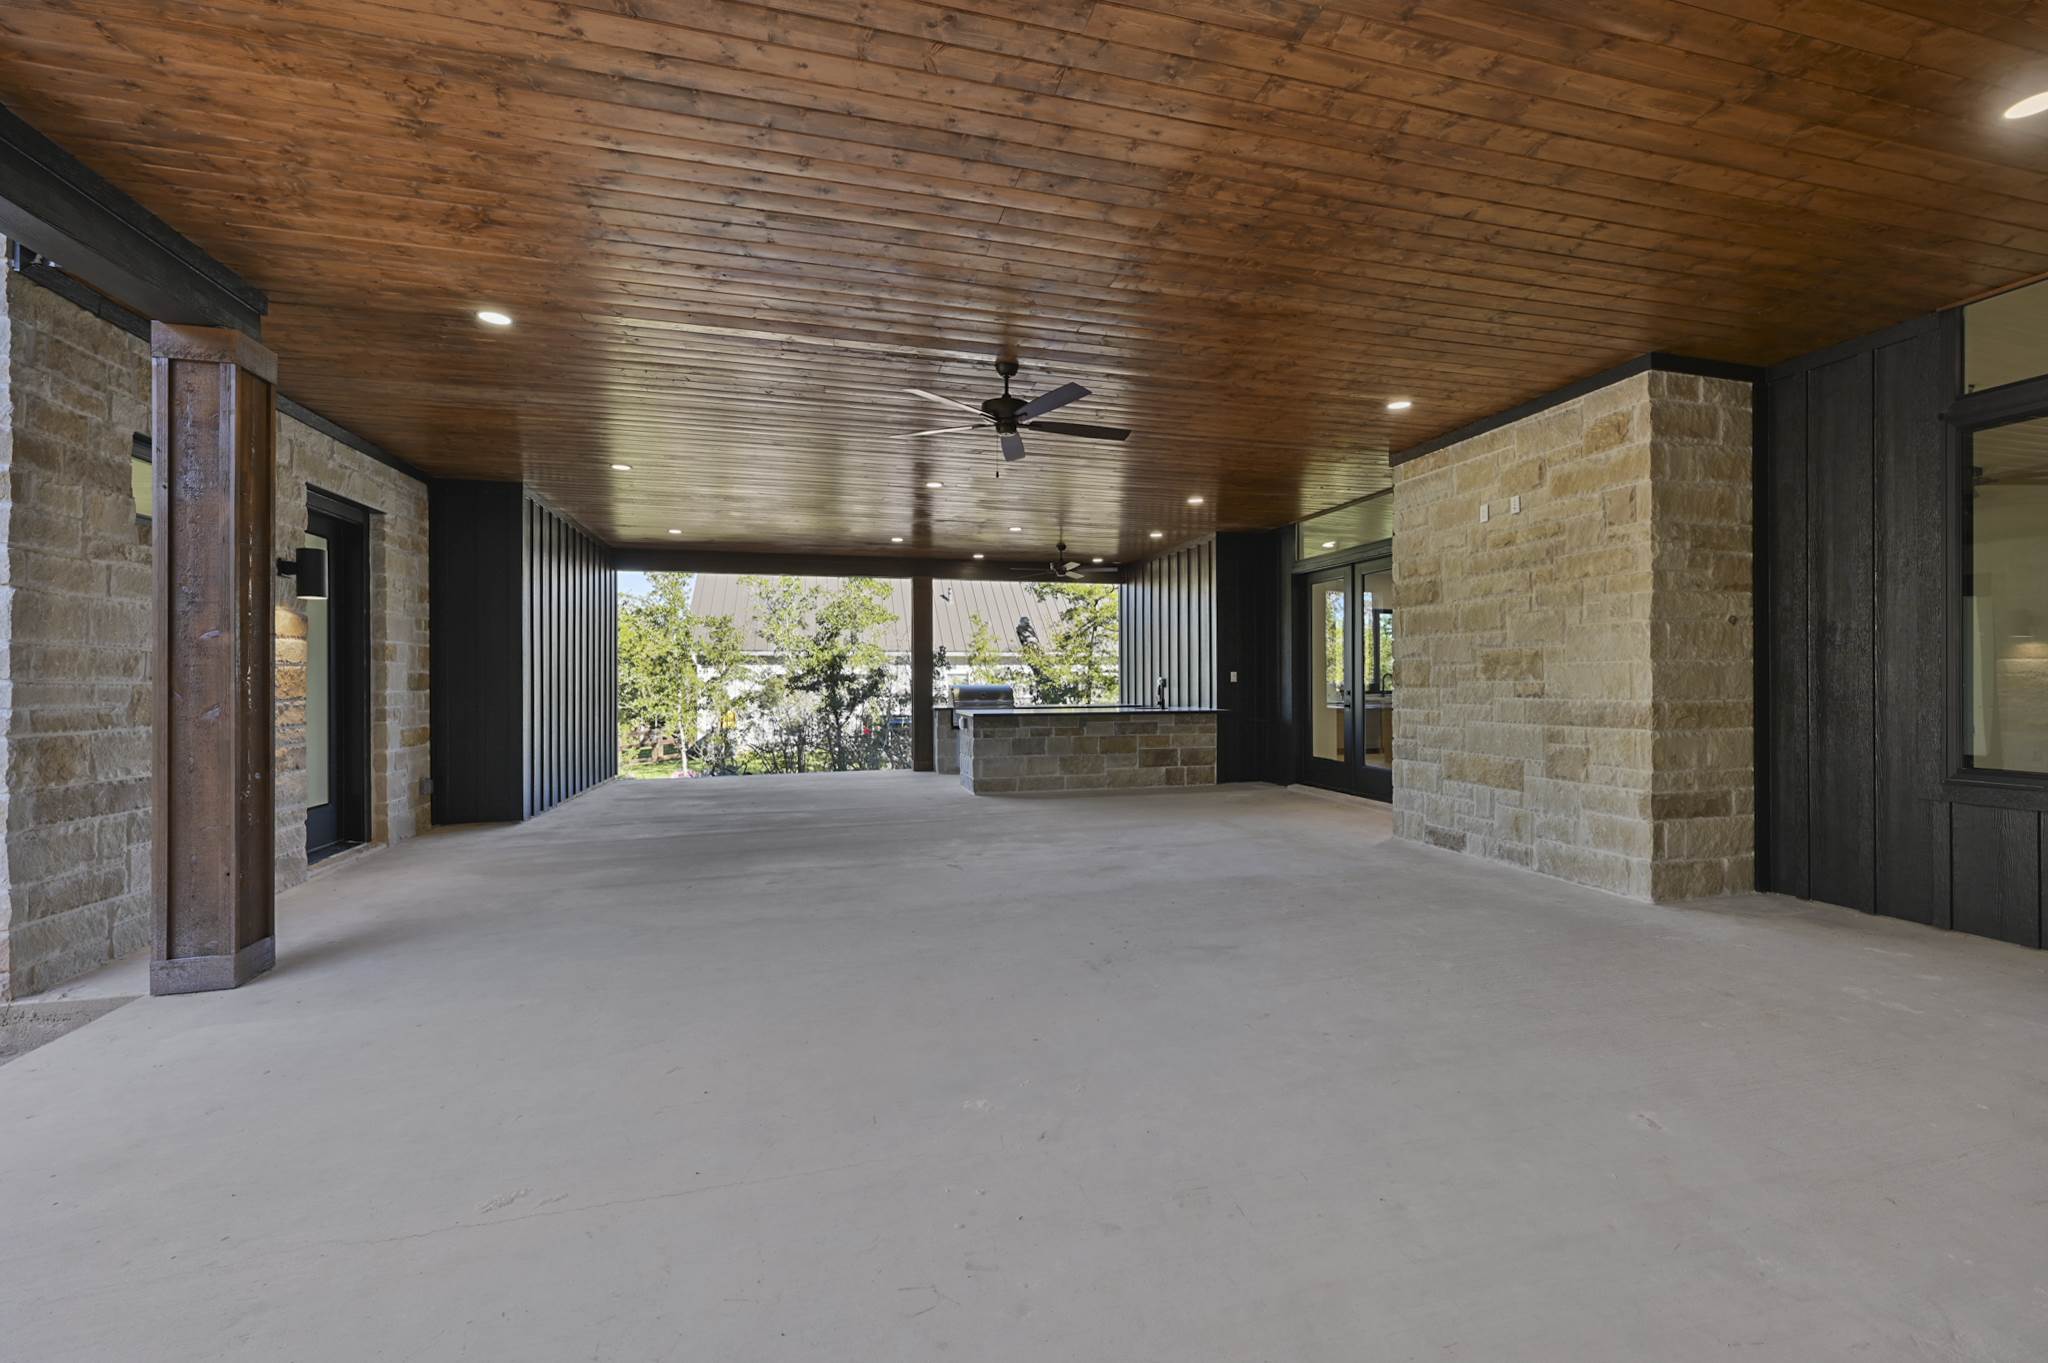 19363 Moonlit Hollow, College Station, TX 77845